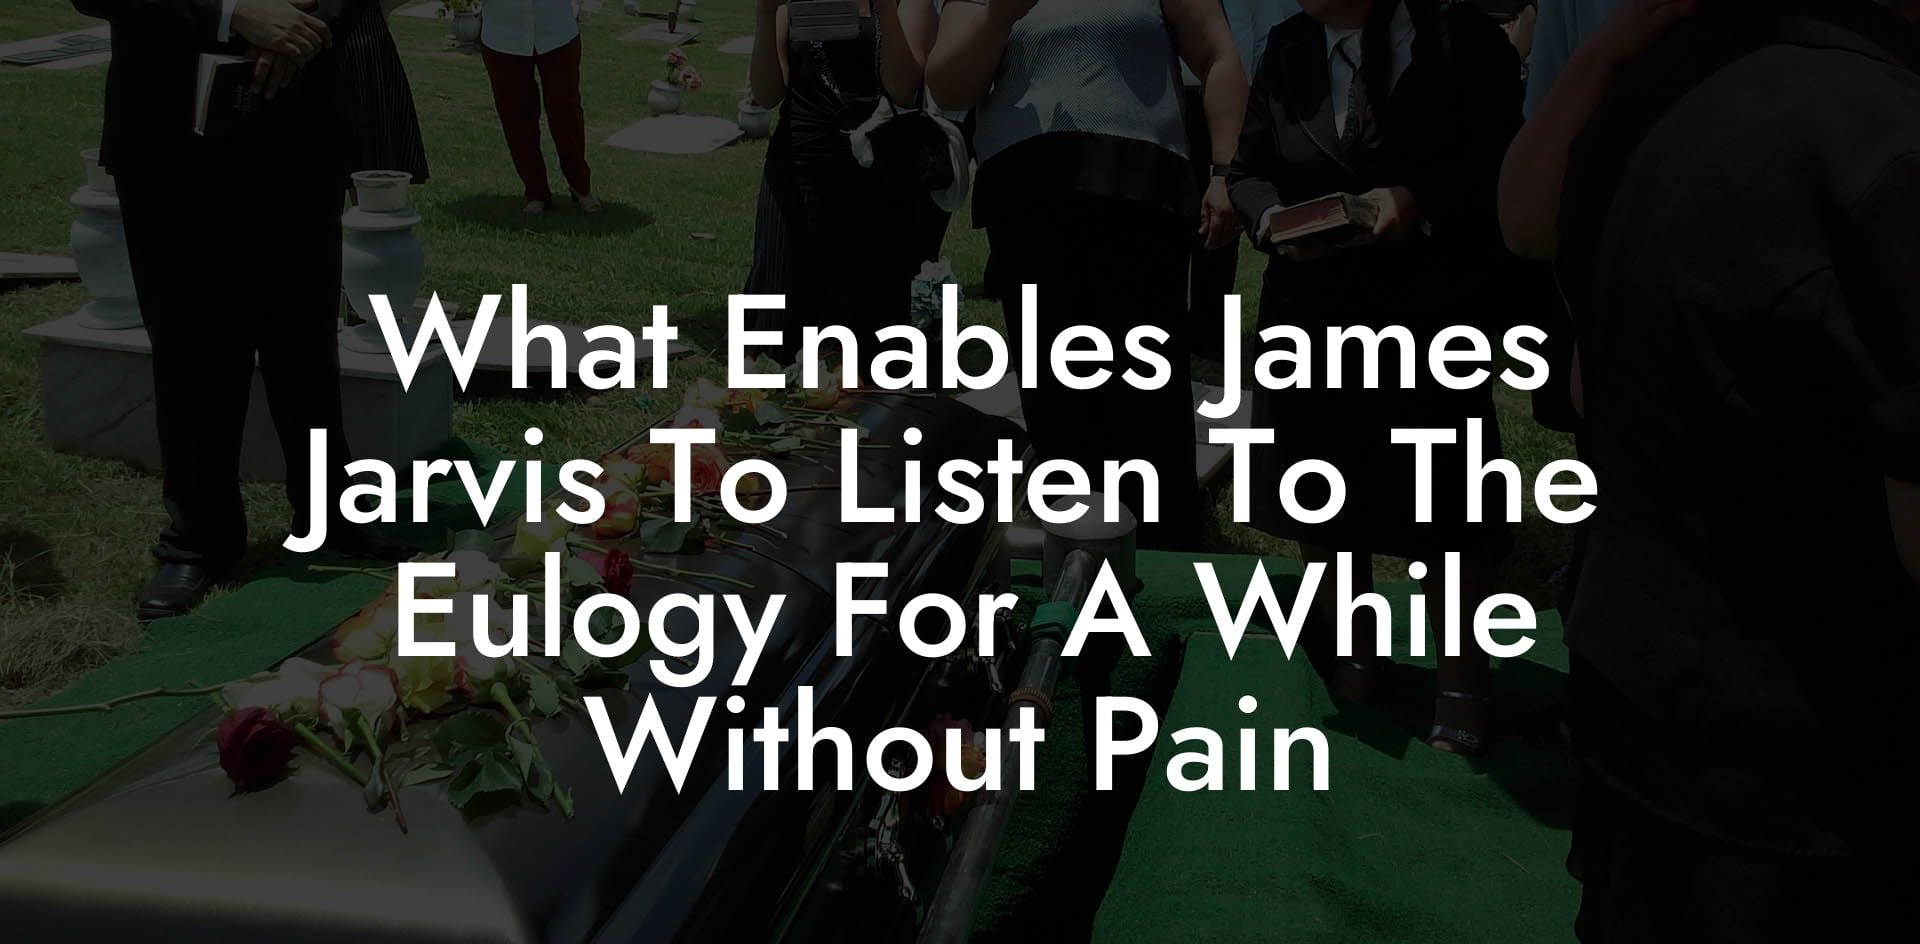 What Enables James Jarvis To Listen To The Eulogy For A While Without Pain